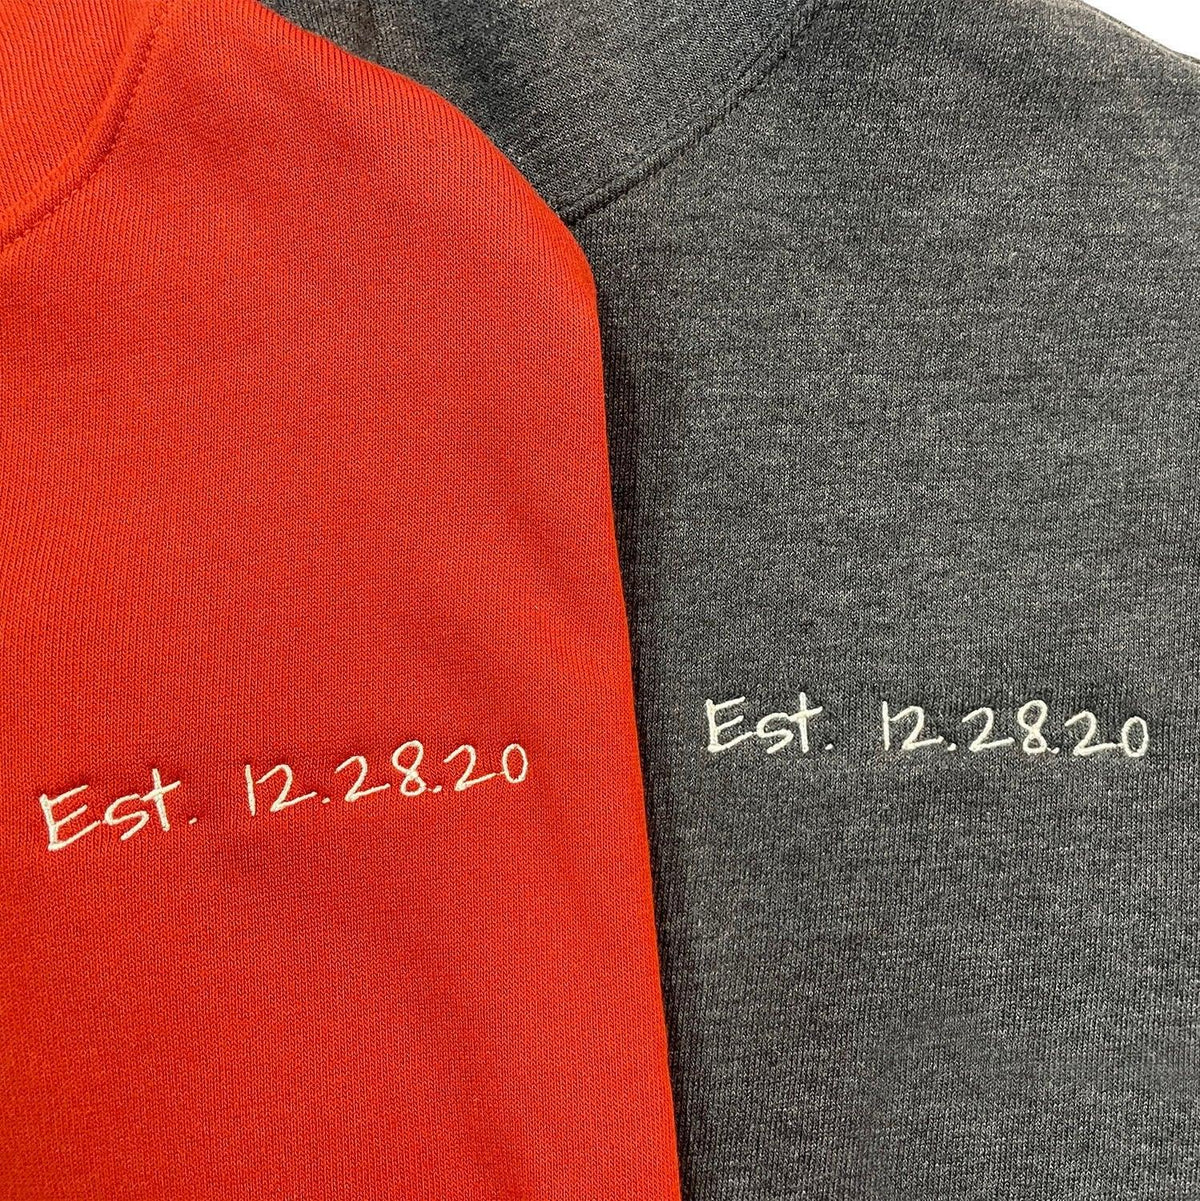 Custom Embroidered Matching Couple Hoodies with Your Initials &amp; Anniversary Date